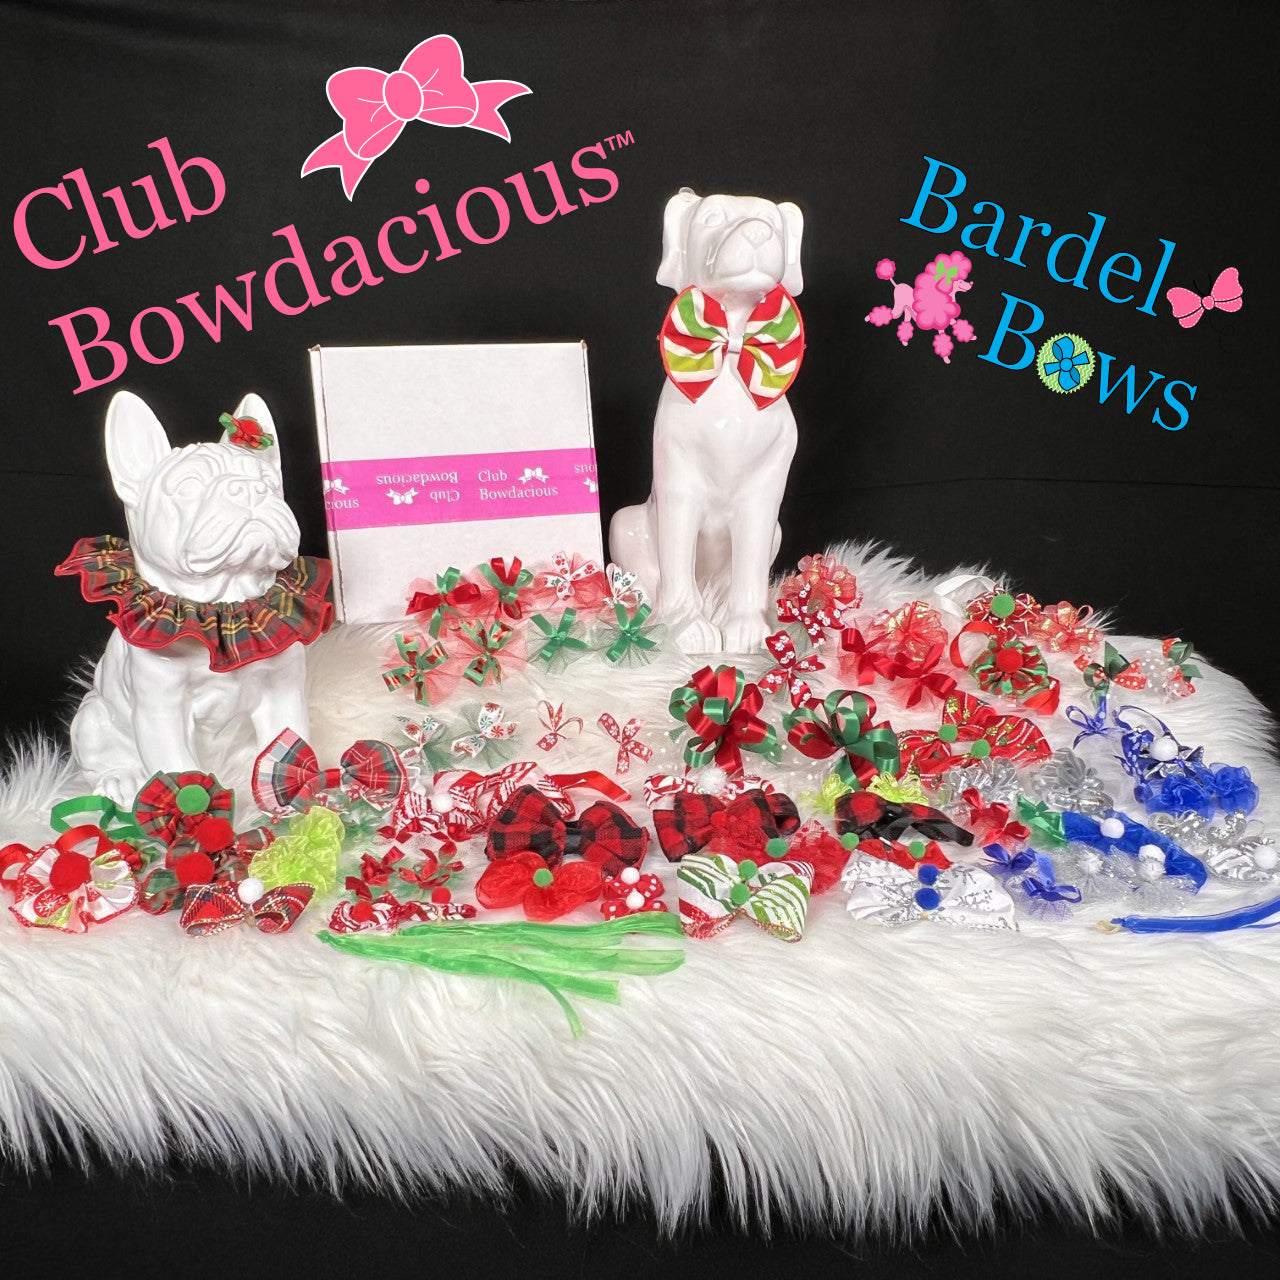 Club Bowdacious Subscription - Recurring Monthly Charge From $49 - $149